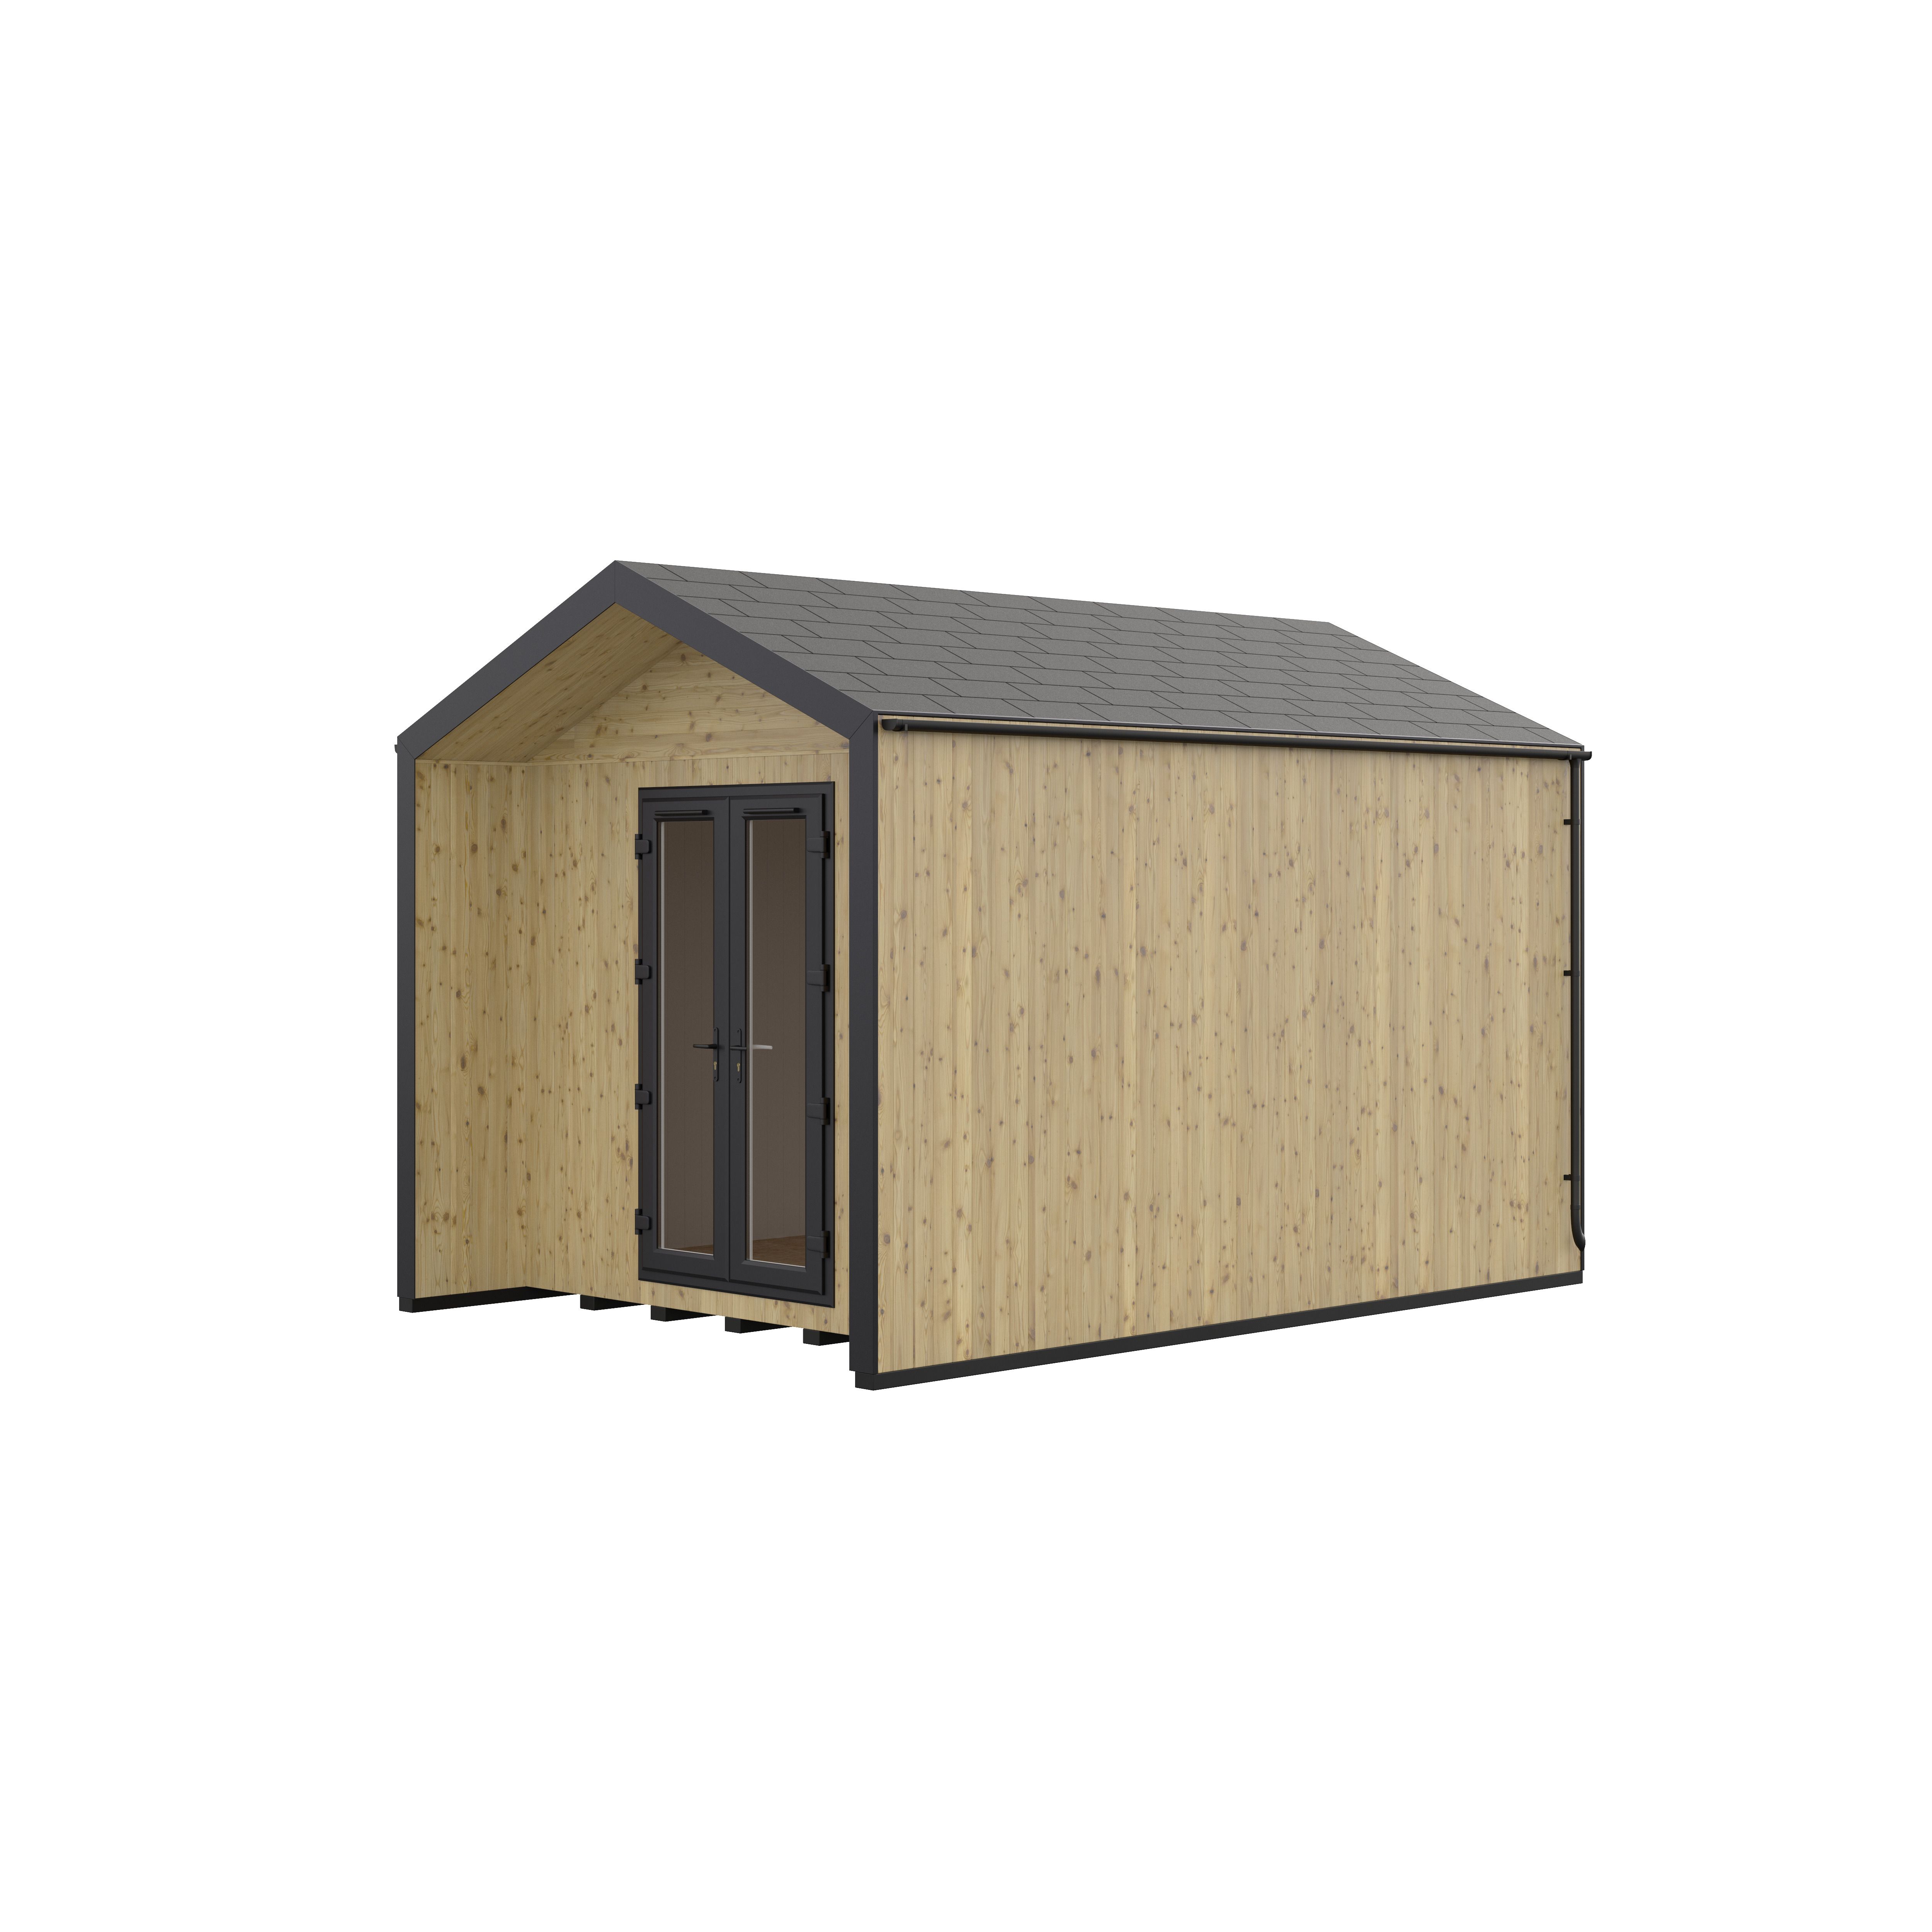 GoodHome Semora 10x14 ft with Double door Pitch Wooden Garden room 3m x 4.4m (Base included)